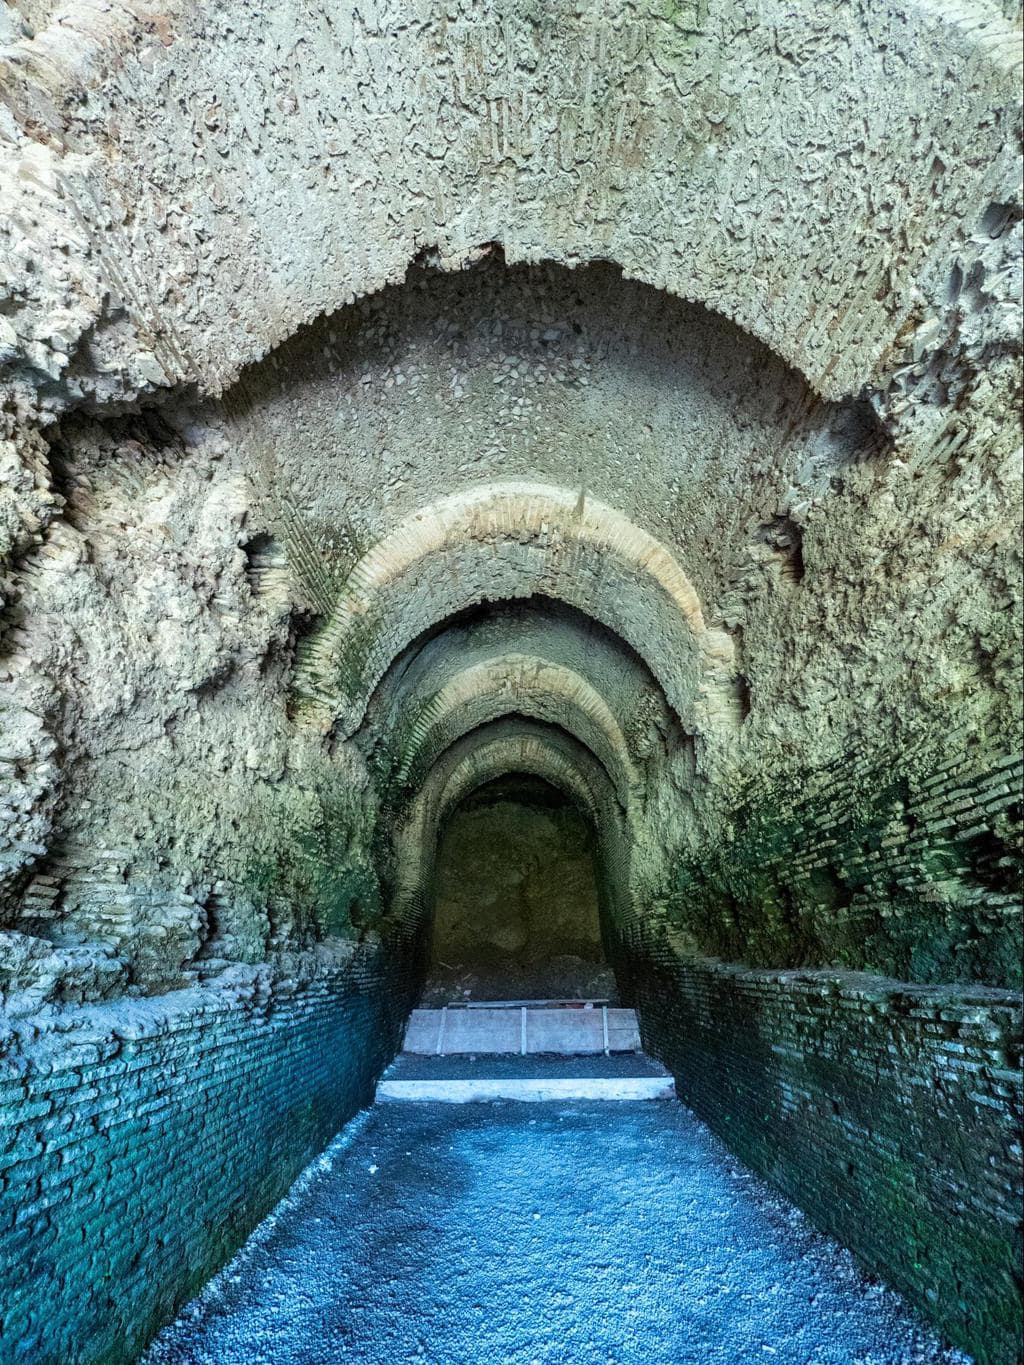 The entrance to the basement of the amphitheatre